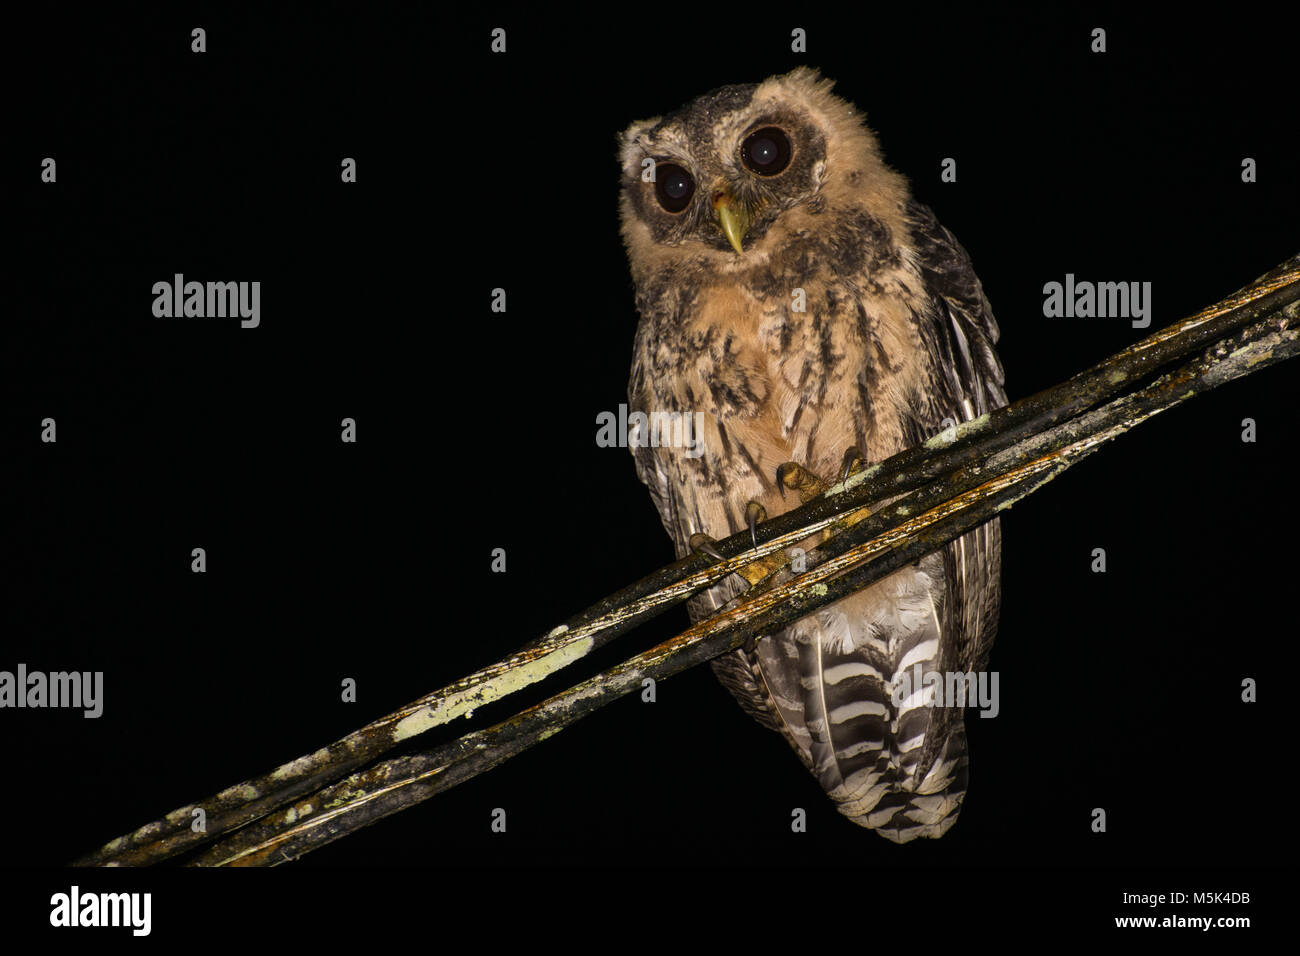 A young mottled owl, this one still has some growing left to do as evidenced by its downy feathers. Stock Photo